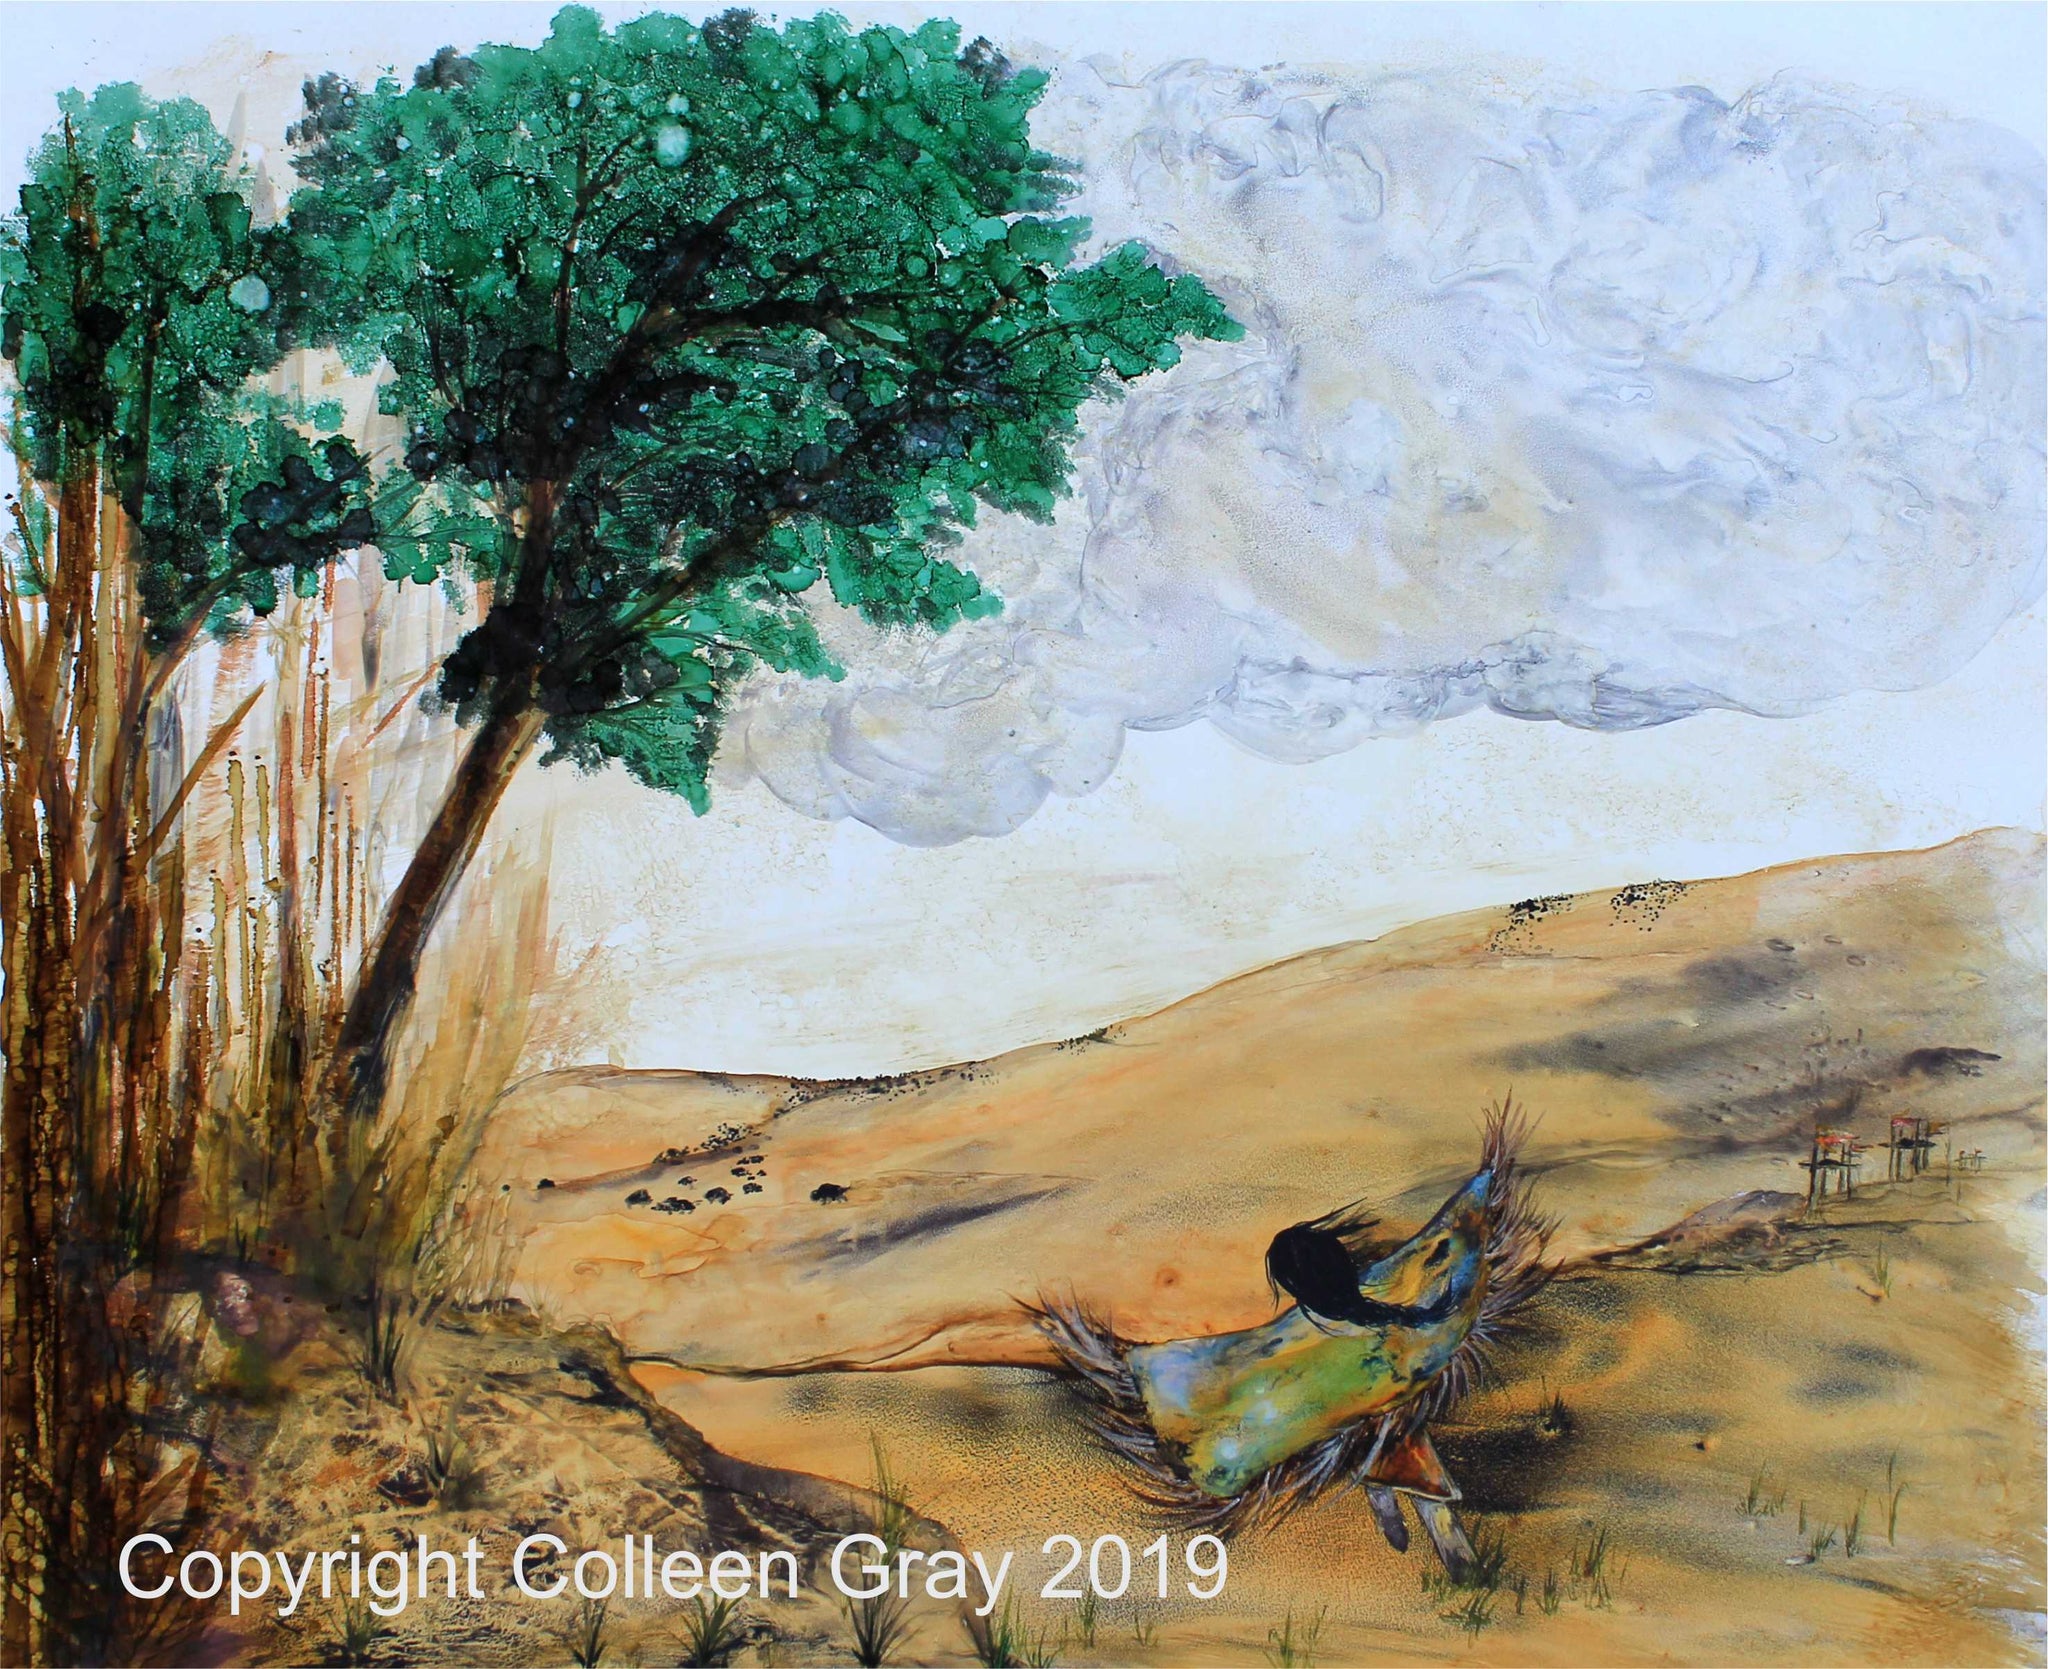 Image of Title: Dancing for the Earth 16x20 archival print by Metis Artist Colleen Gray Indigenous Canadian Art Work. Landscape, green trees, brown earth, blue sky, woman outstretched arms.For sale at https://artforaidshop.ca